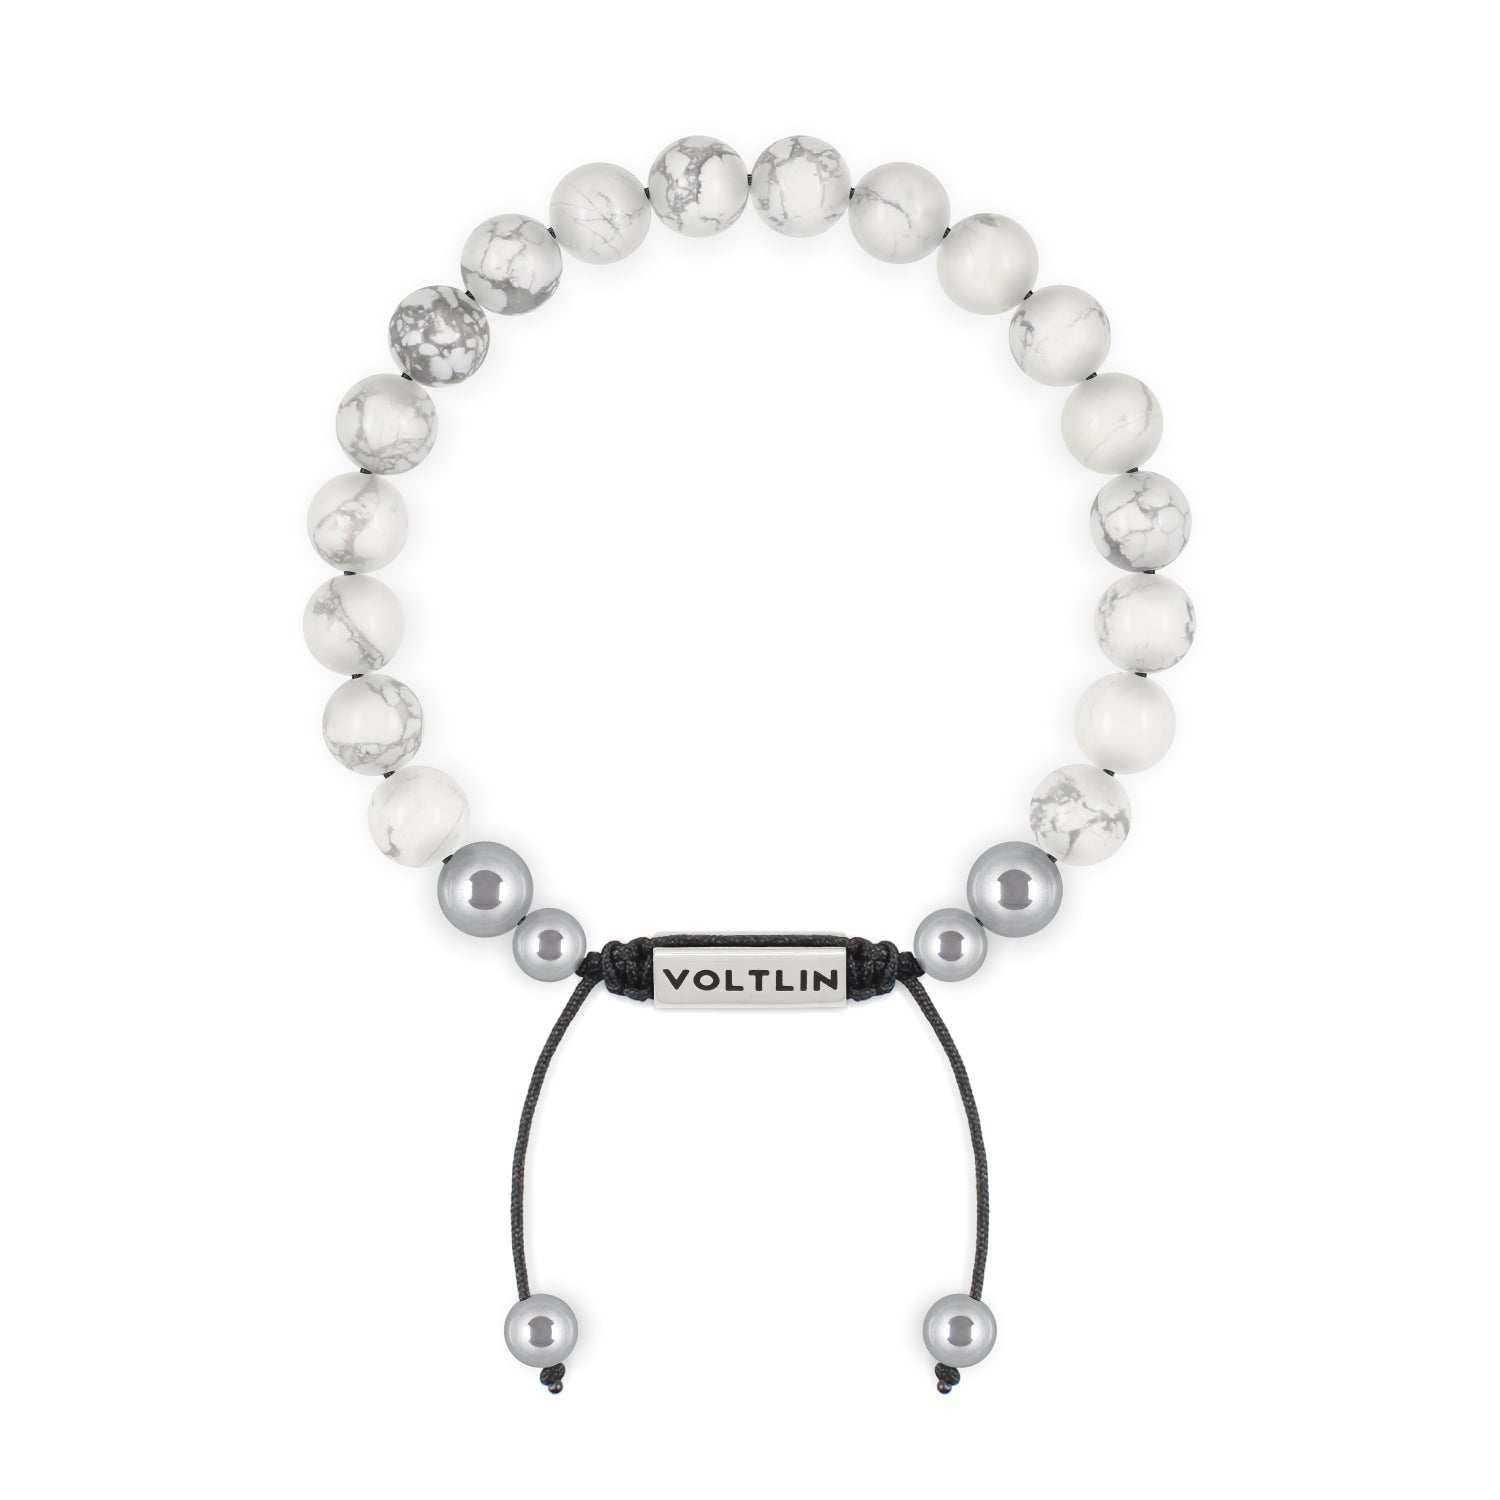 Front view of an 8mm Howlite beaded shamballa bracelet with silver stainless steel logo bead made by Voltlin